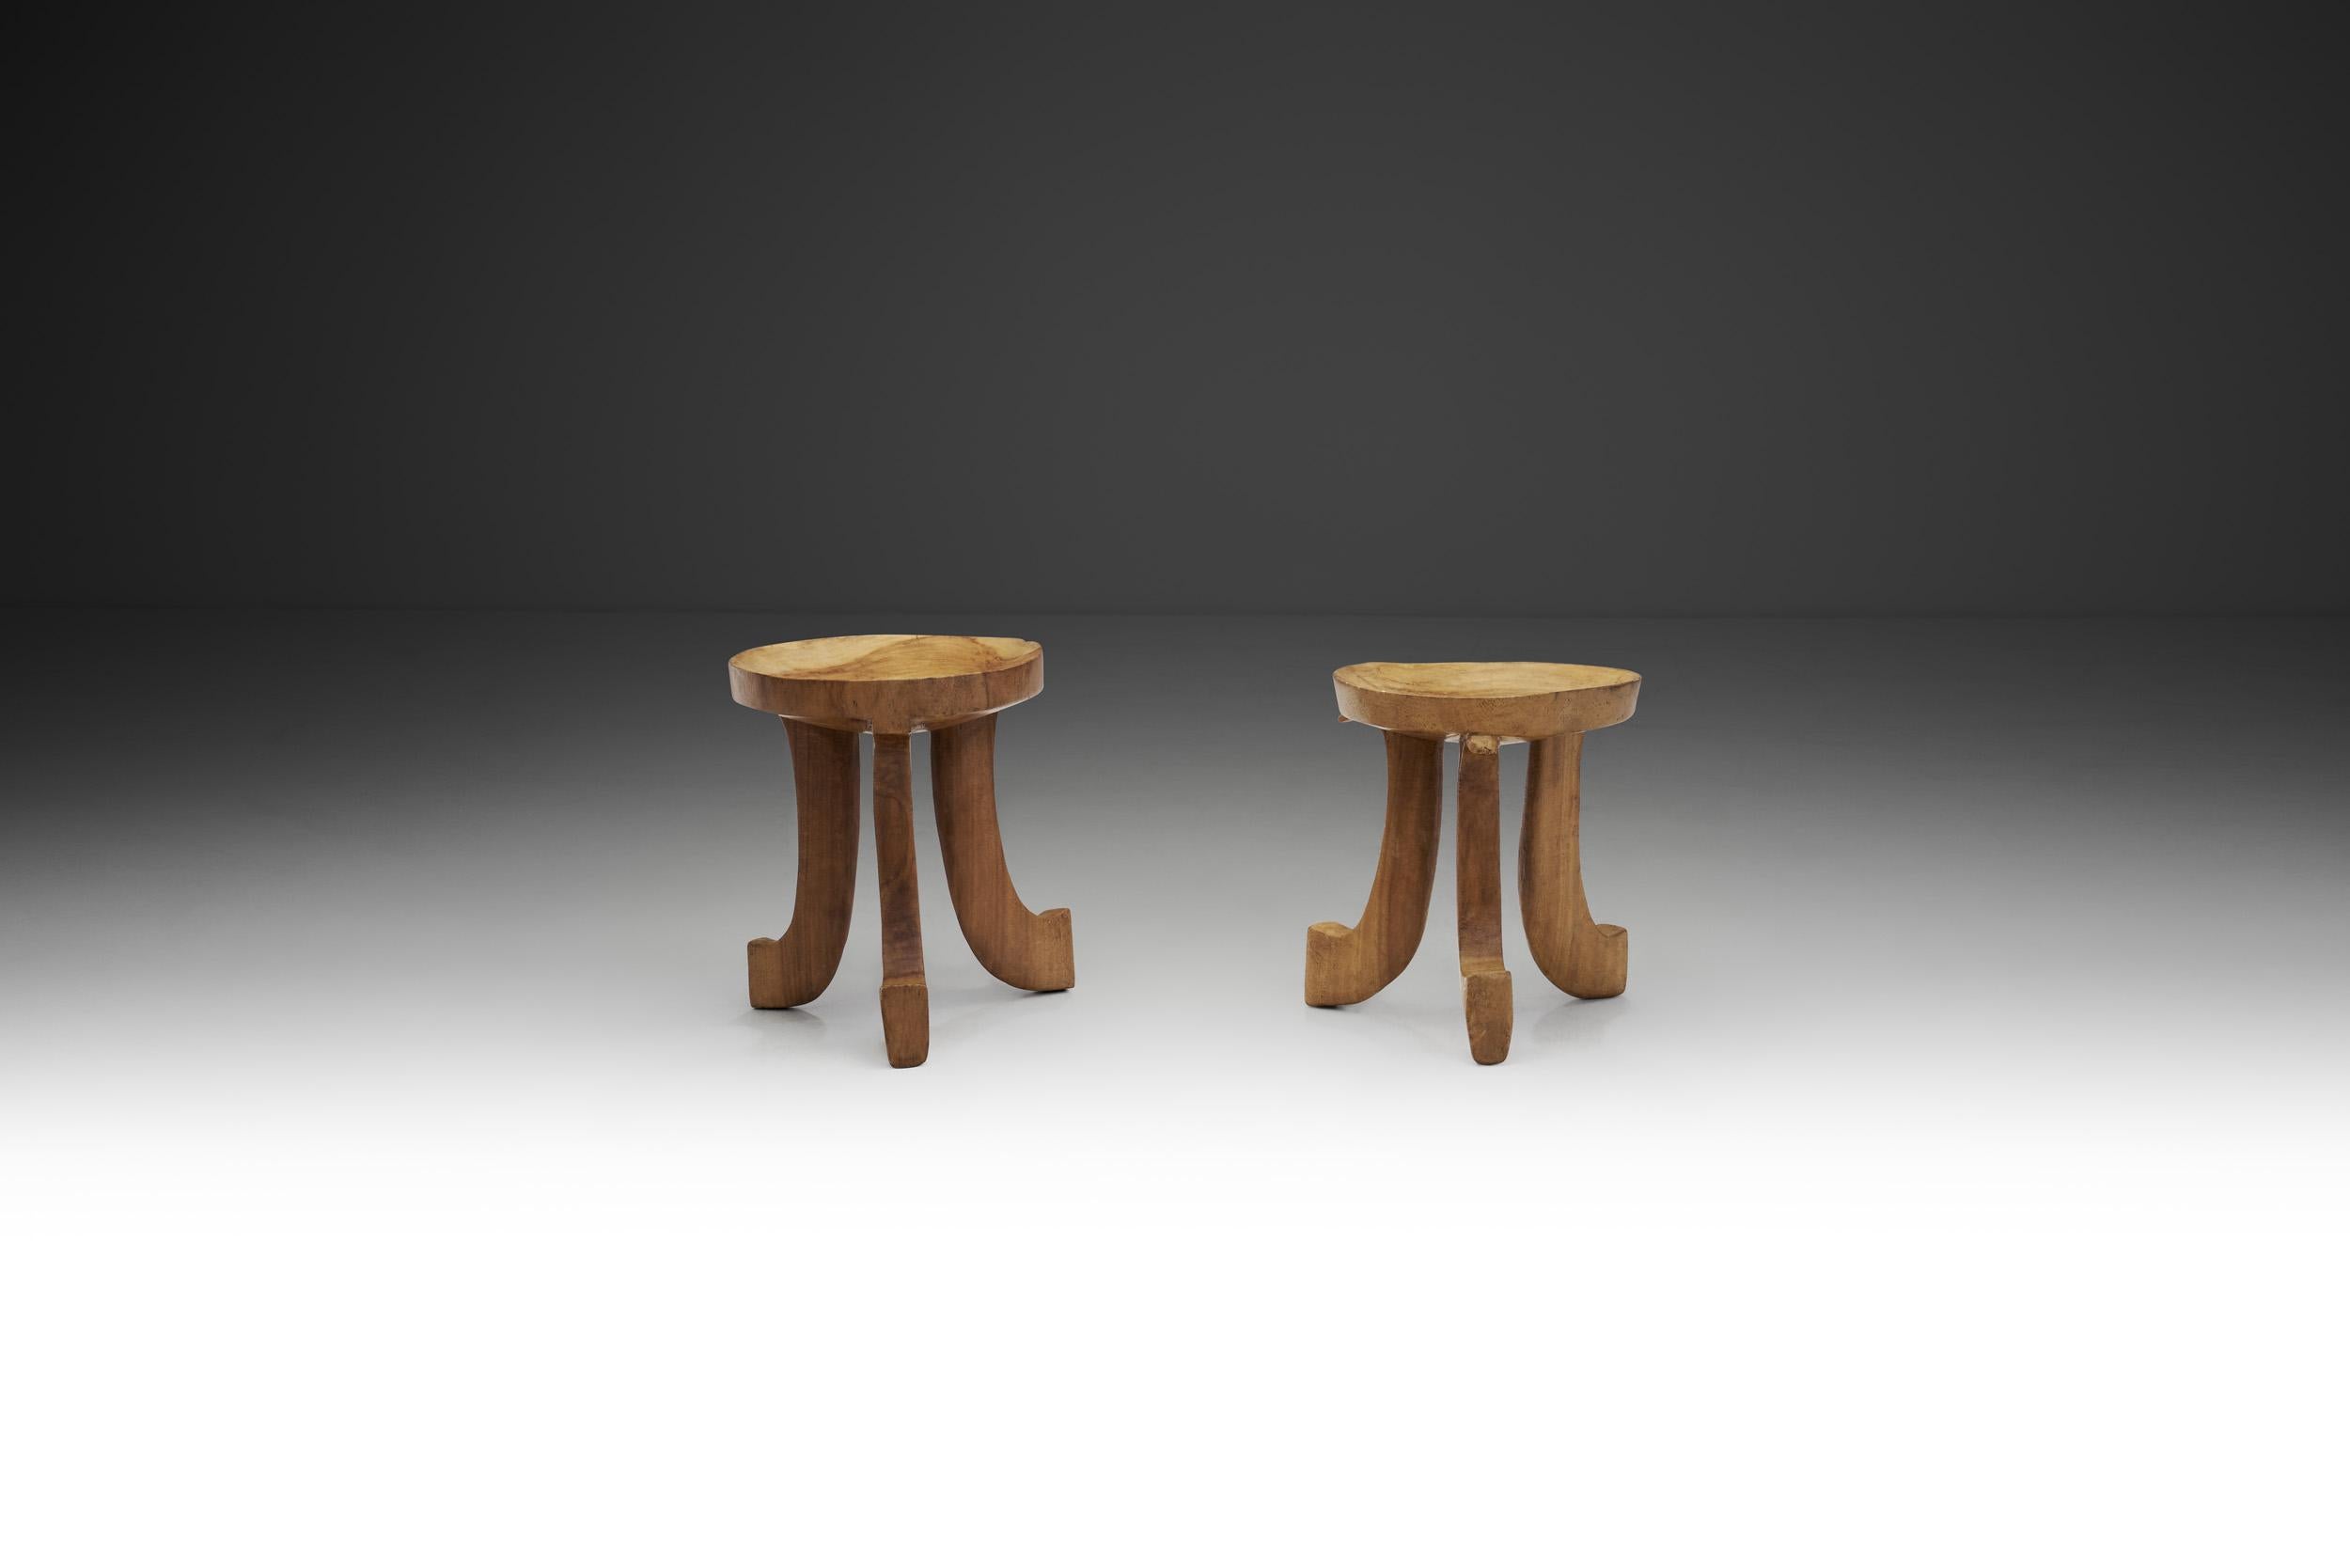 E?thiopian and other African-influenced furniture had been made in Europe from the 1850s, the most famous being Adolf Loos’s “Theban stool” designed around 1903 in the Egyptian revival style. Based on its visual qualities, this pair of hand carved